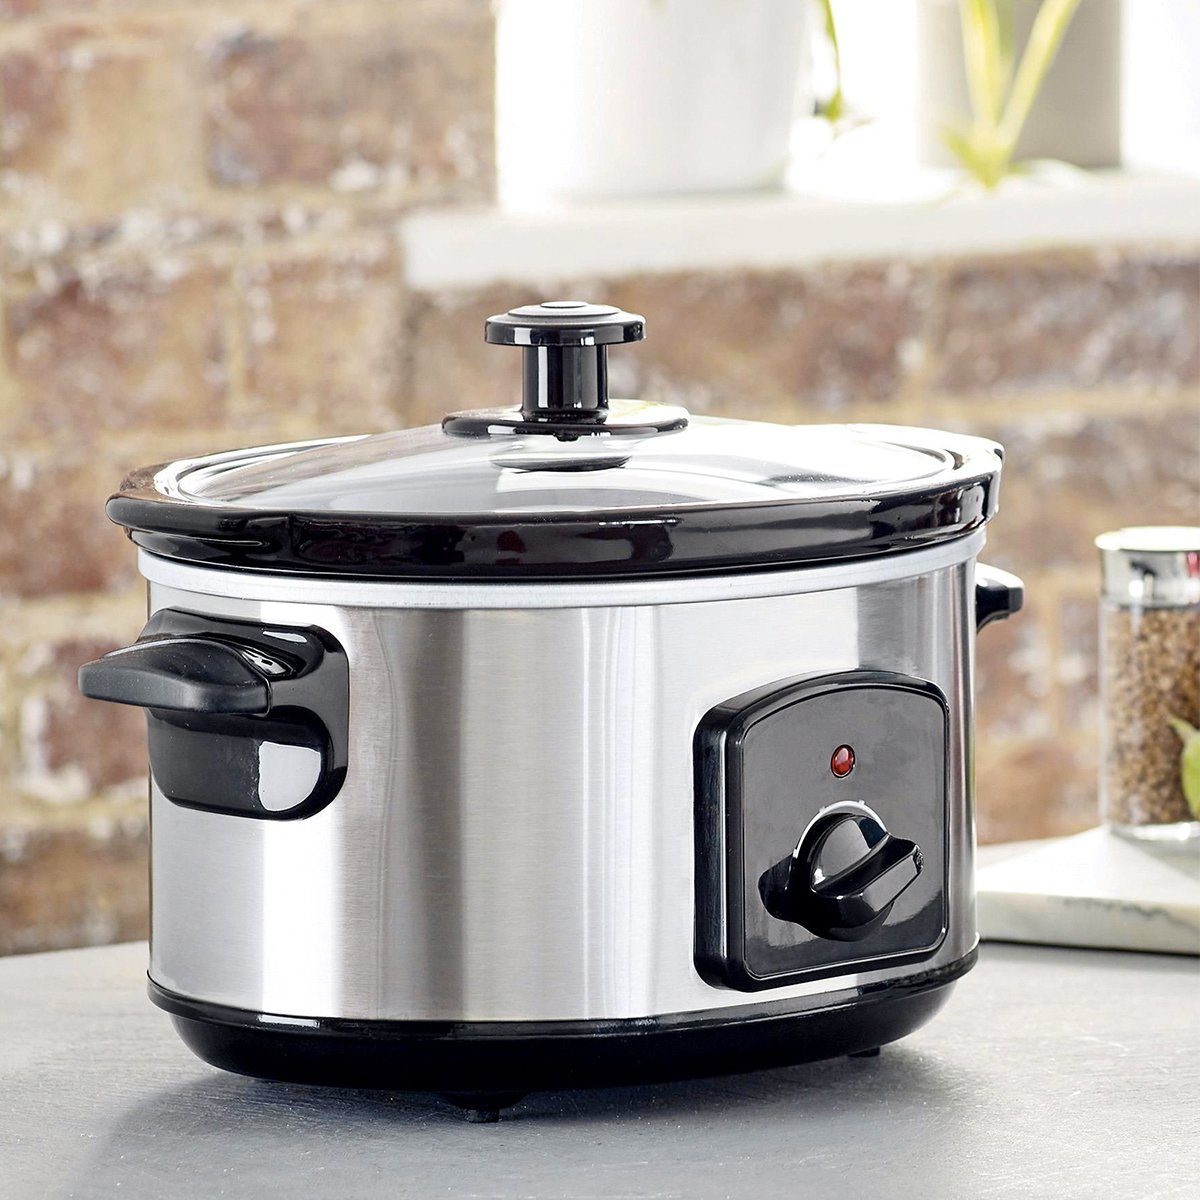 This $15 Slow Cooker Has More Than 15,700 Five-Star Ratings on